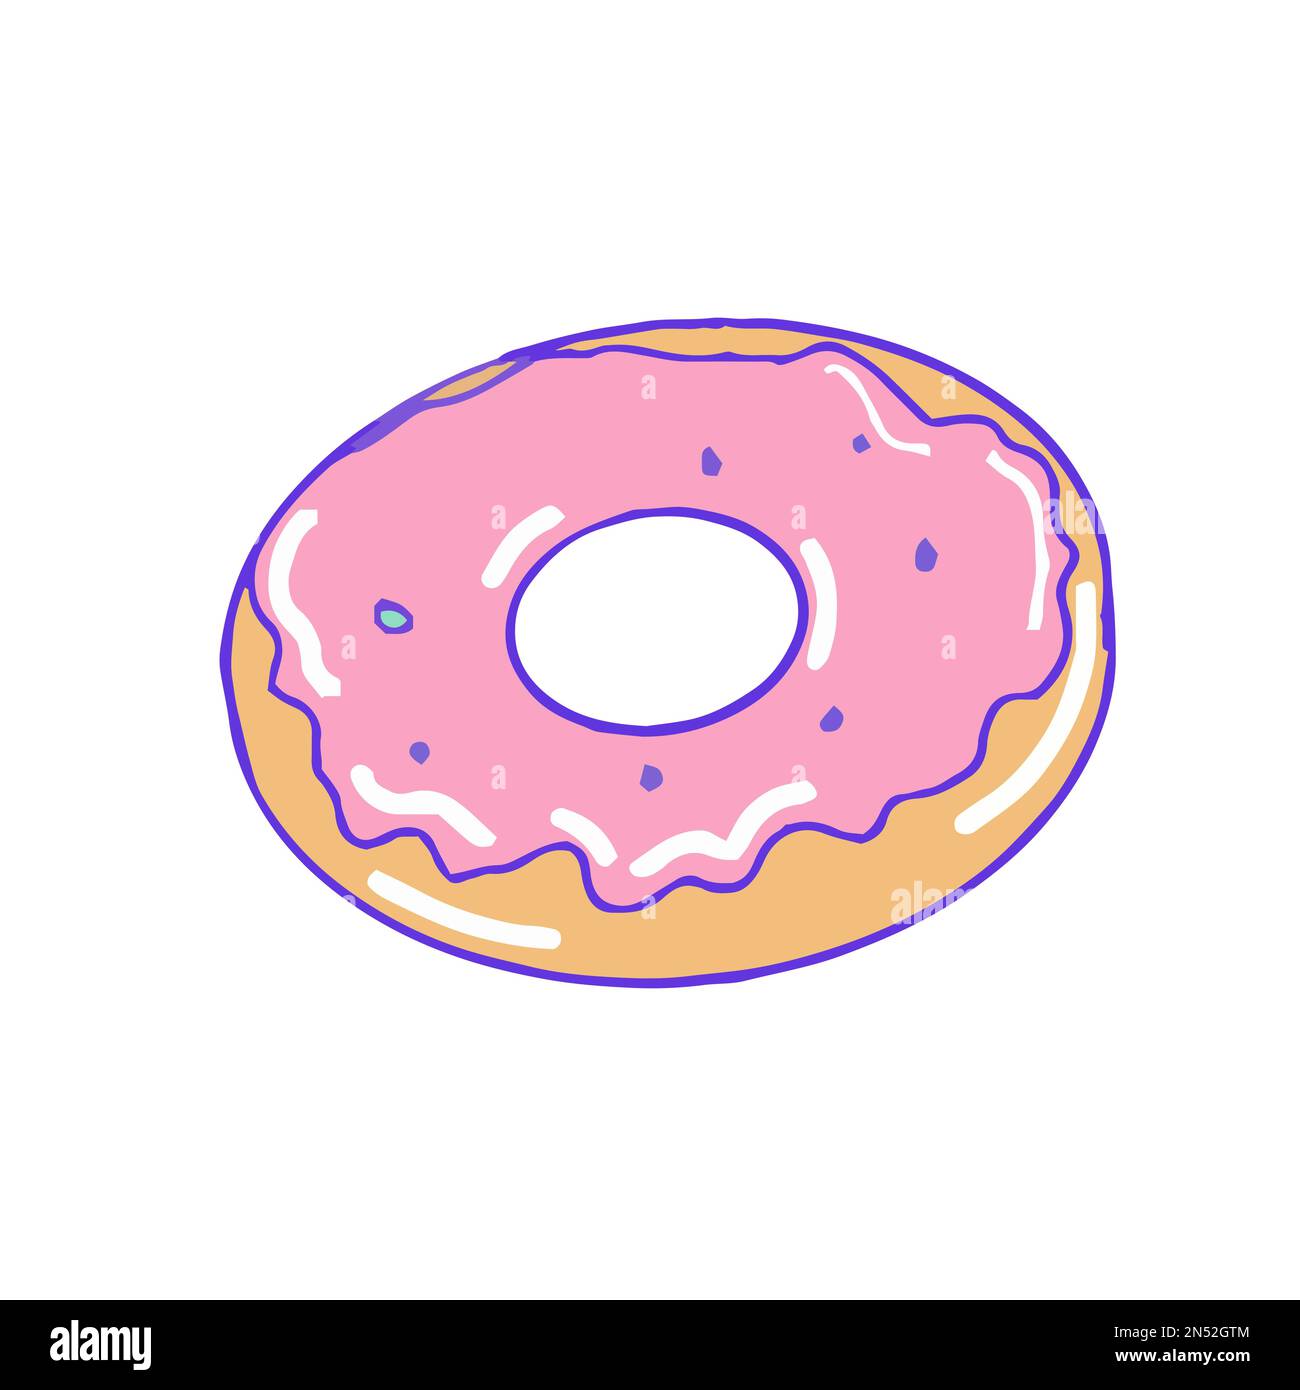 Hand drawn aesthetic cute cartoon doughnut with pink icing Stock Vector